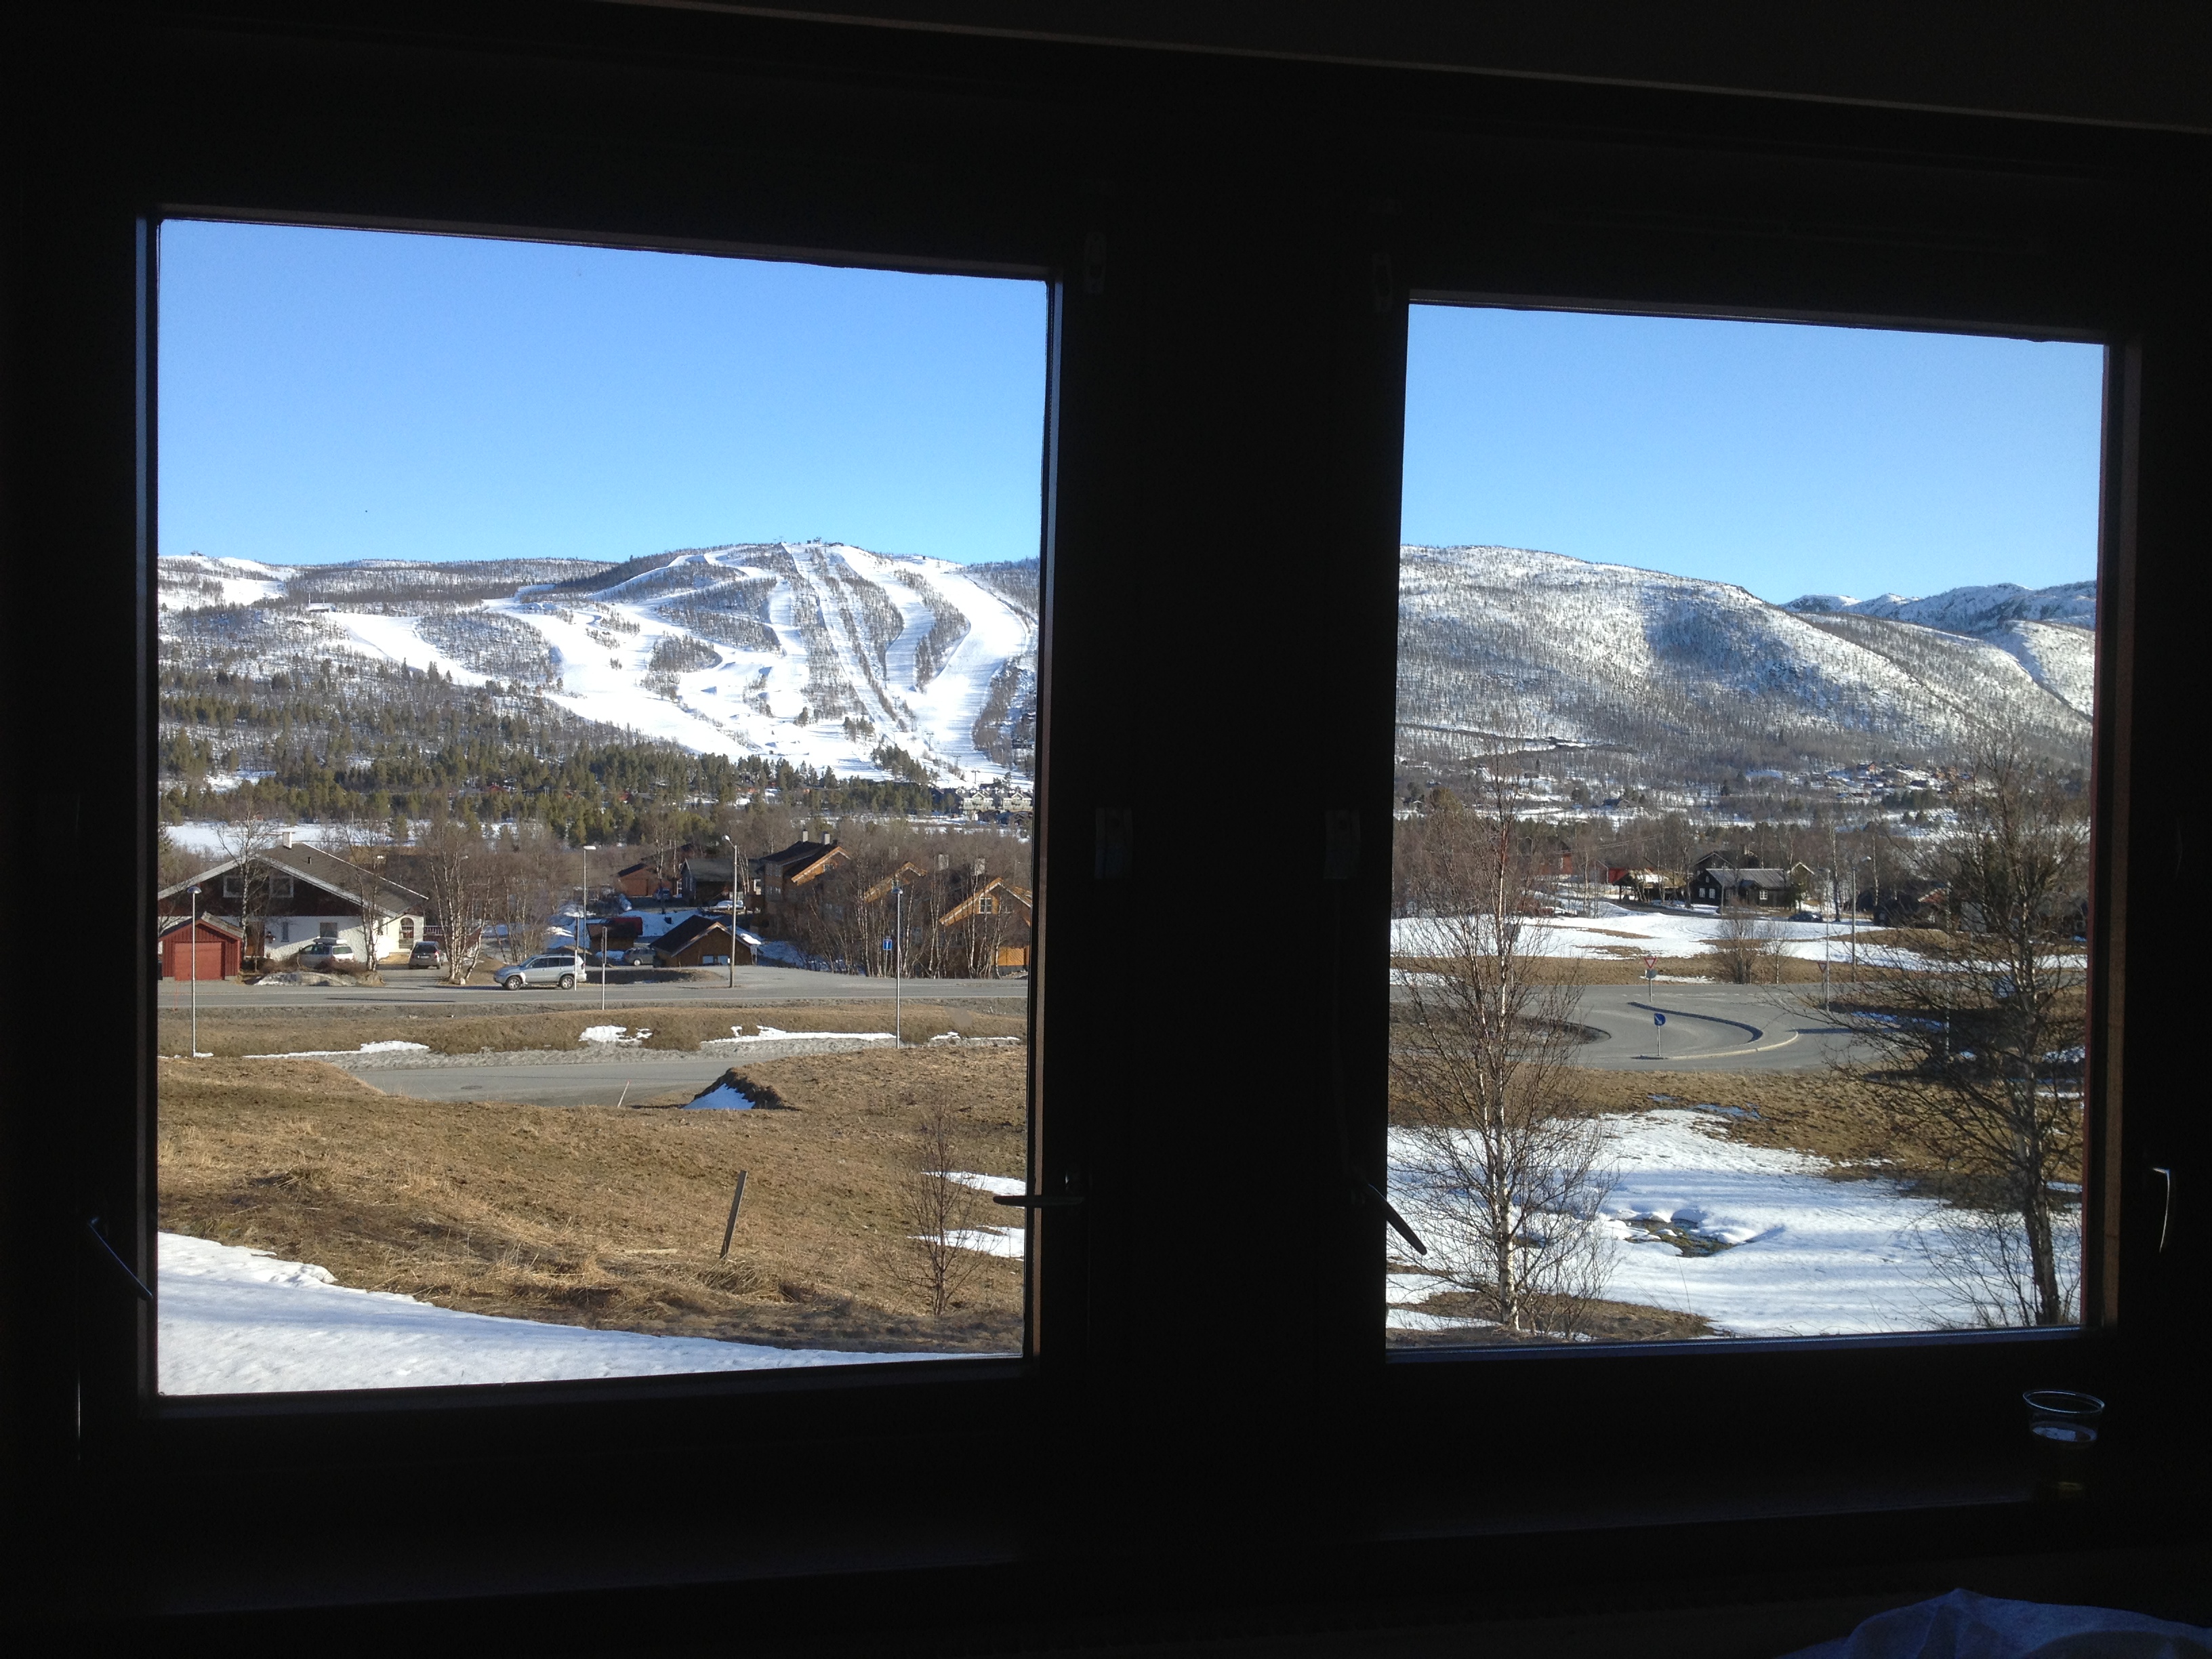 From our bedroom window at the Geilo Hotel